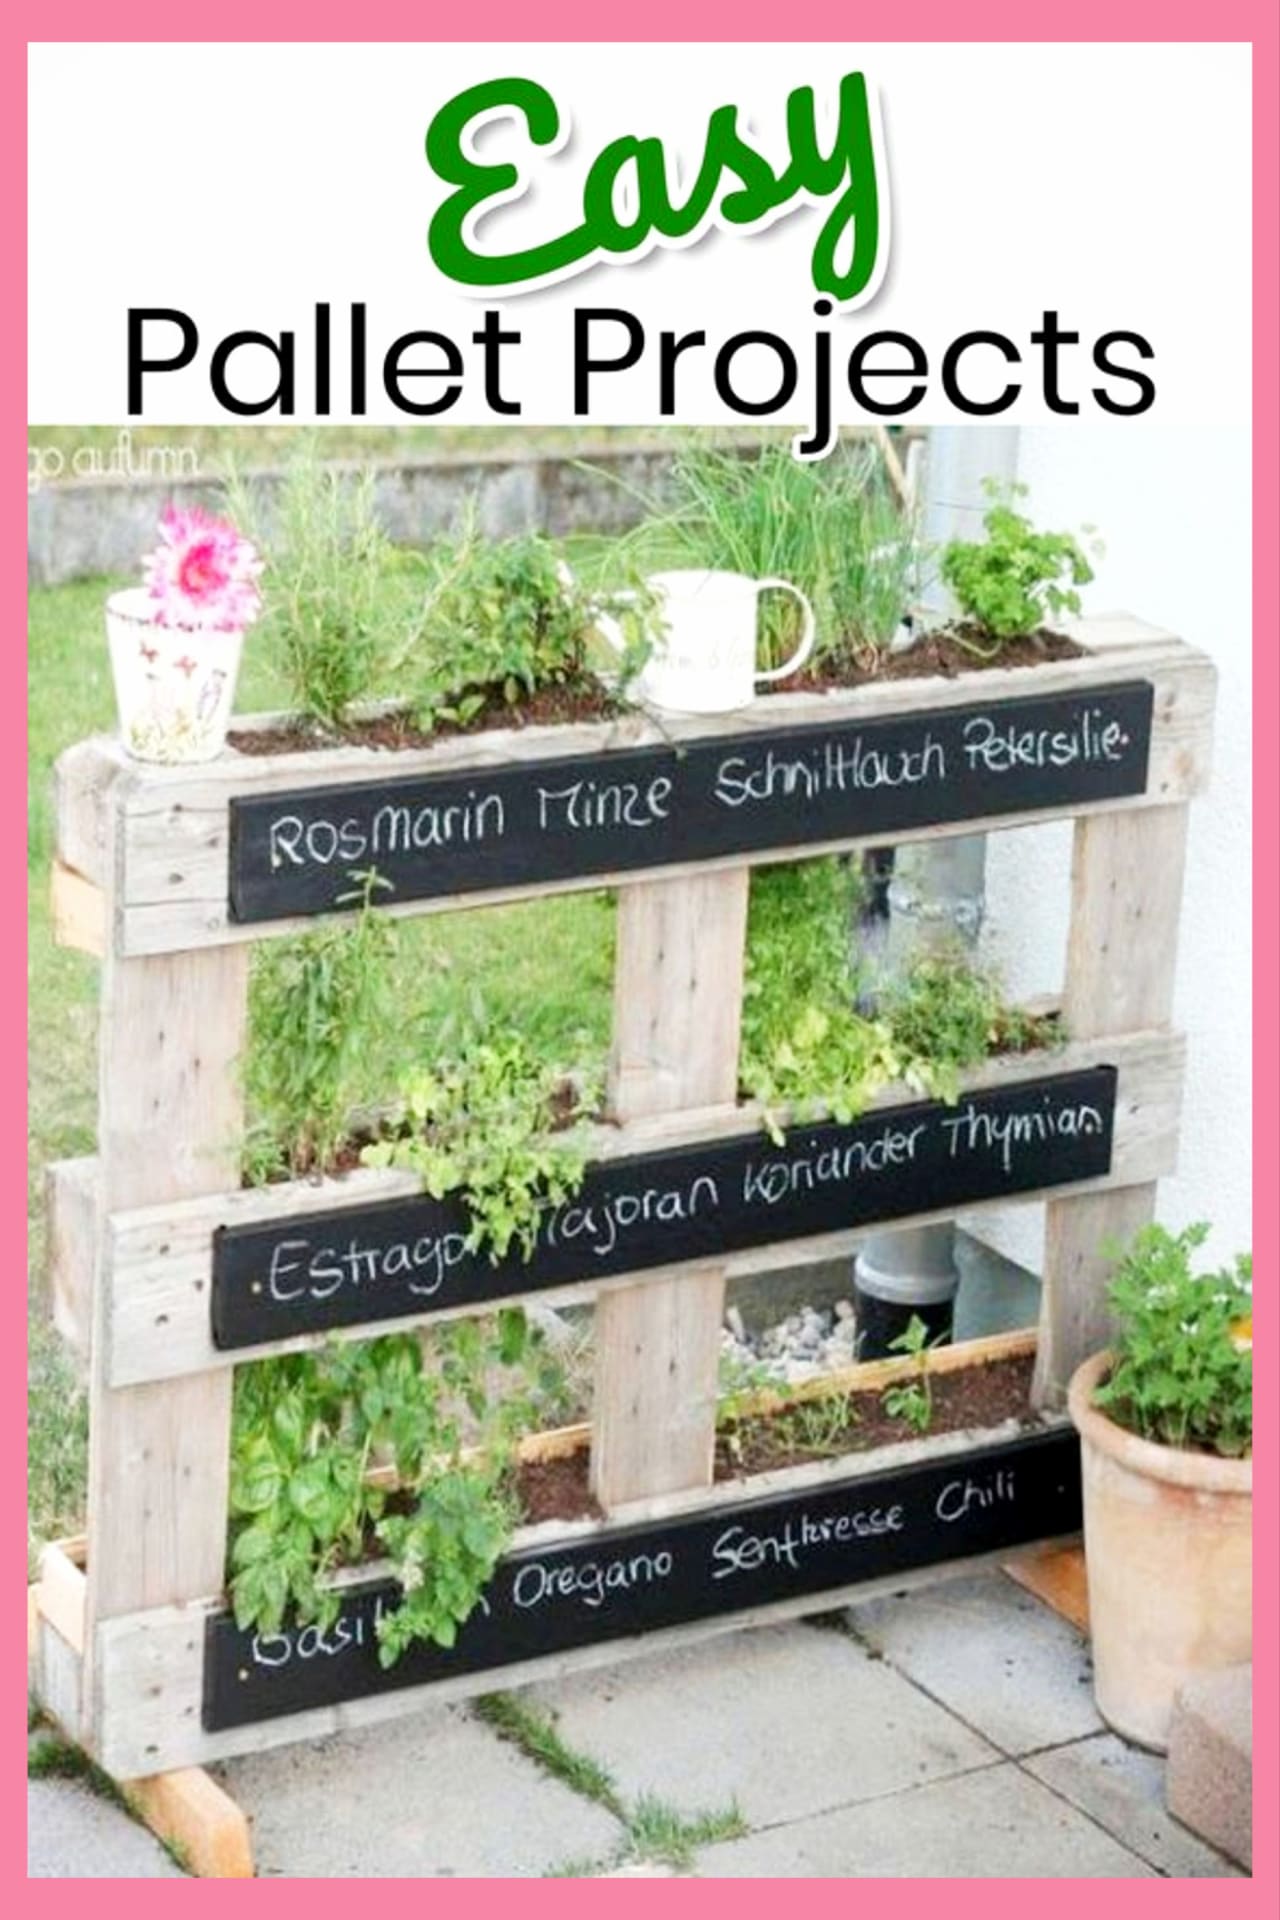 Pallet Projects - easy DIY outdoor pallet projects for your backyard garden